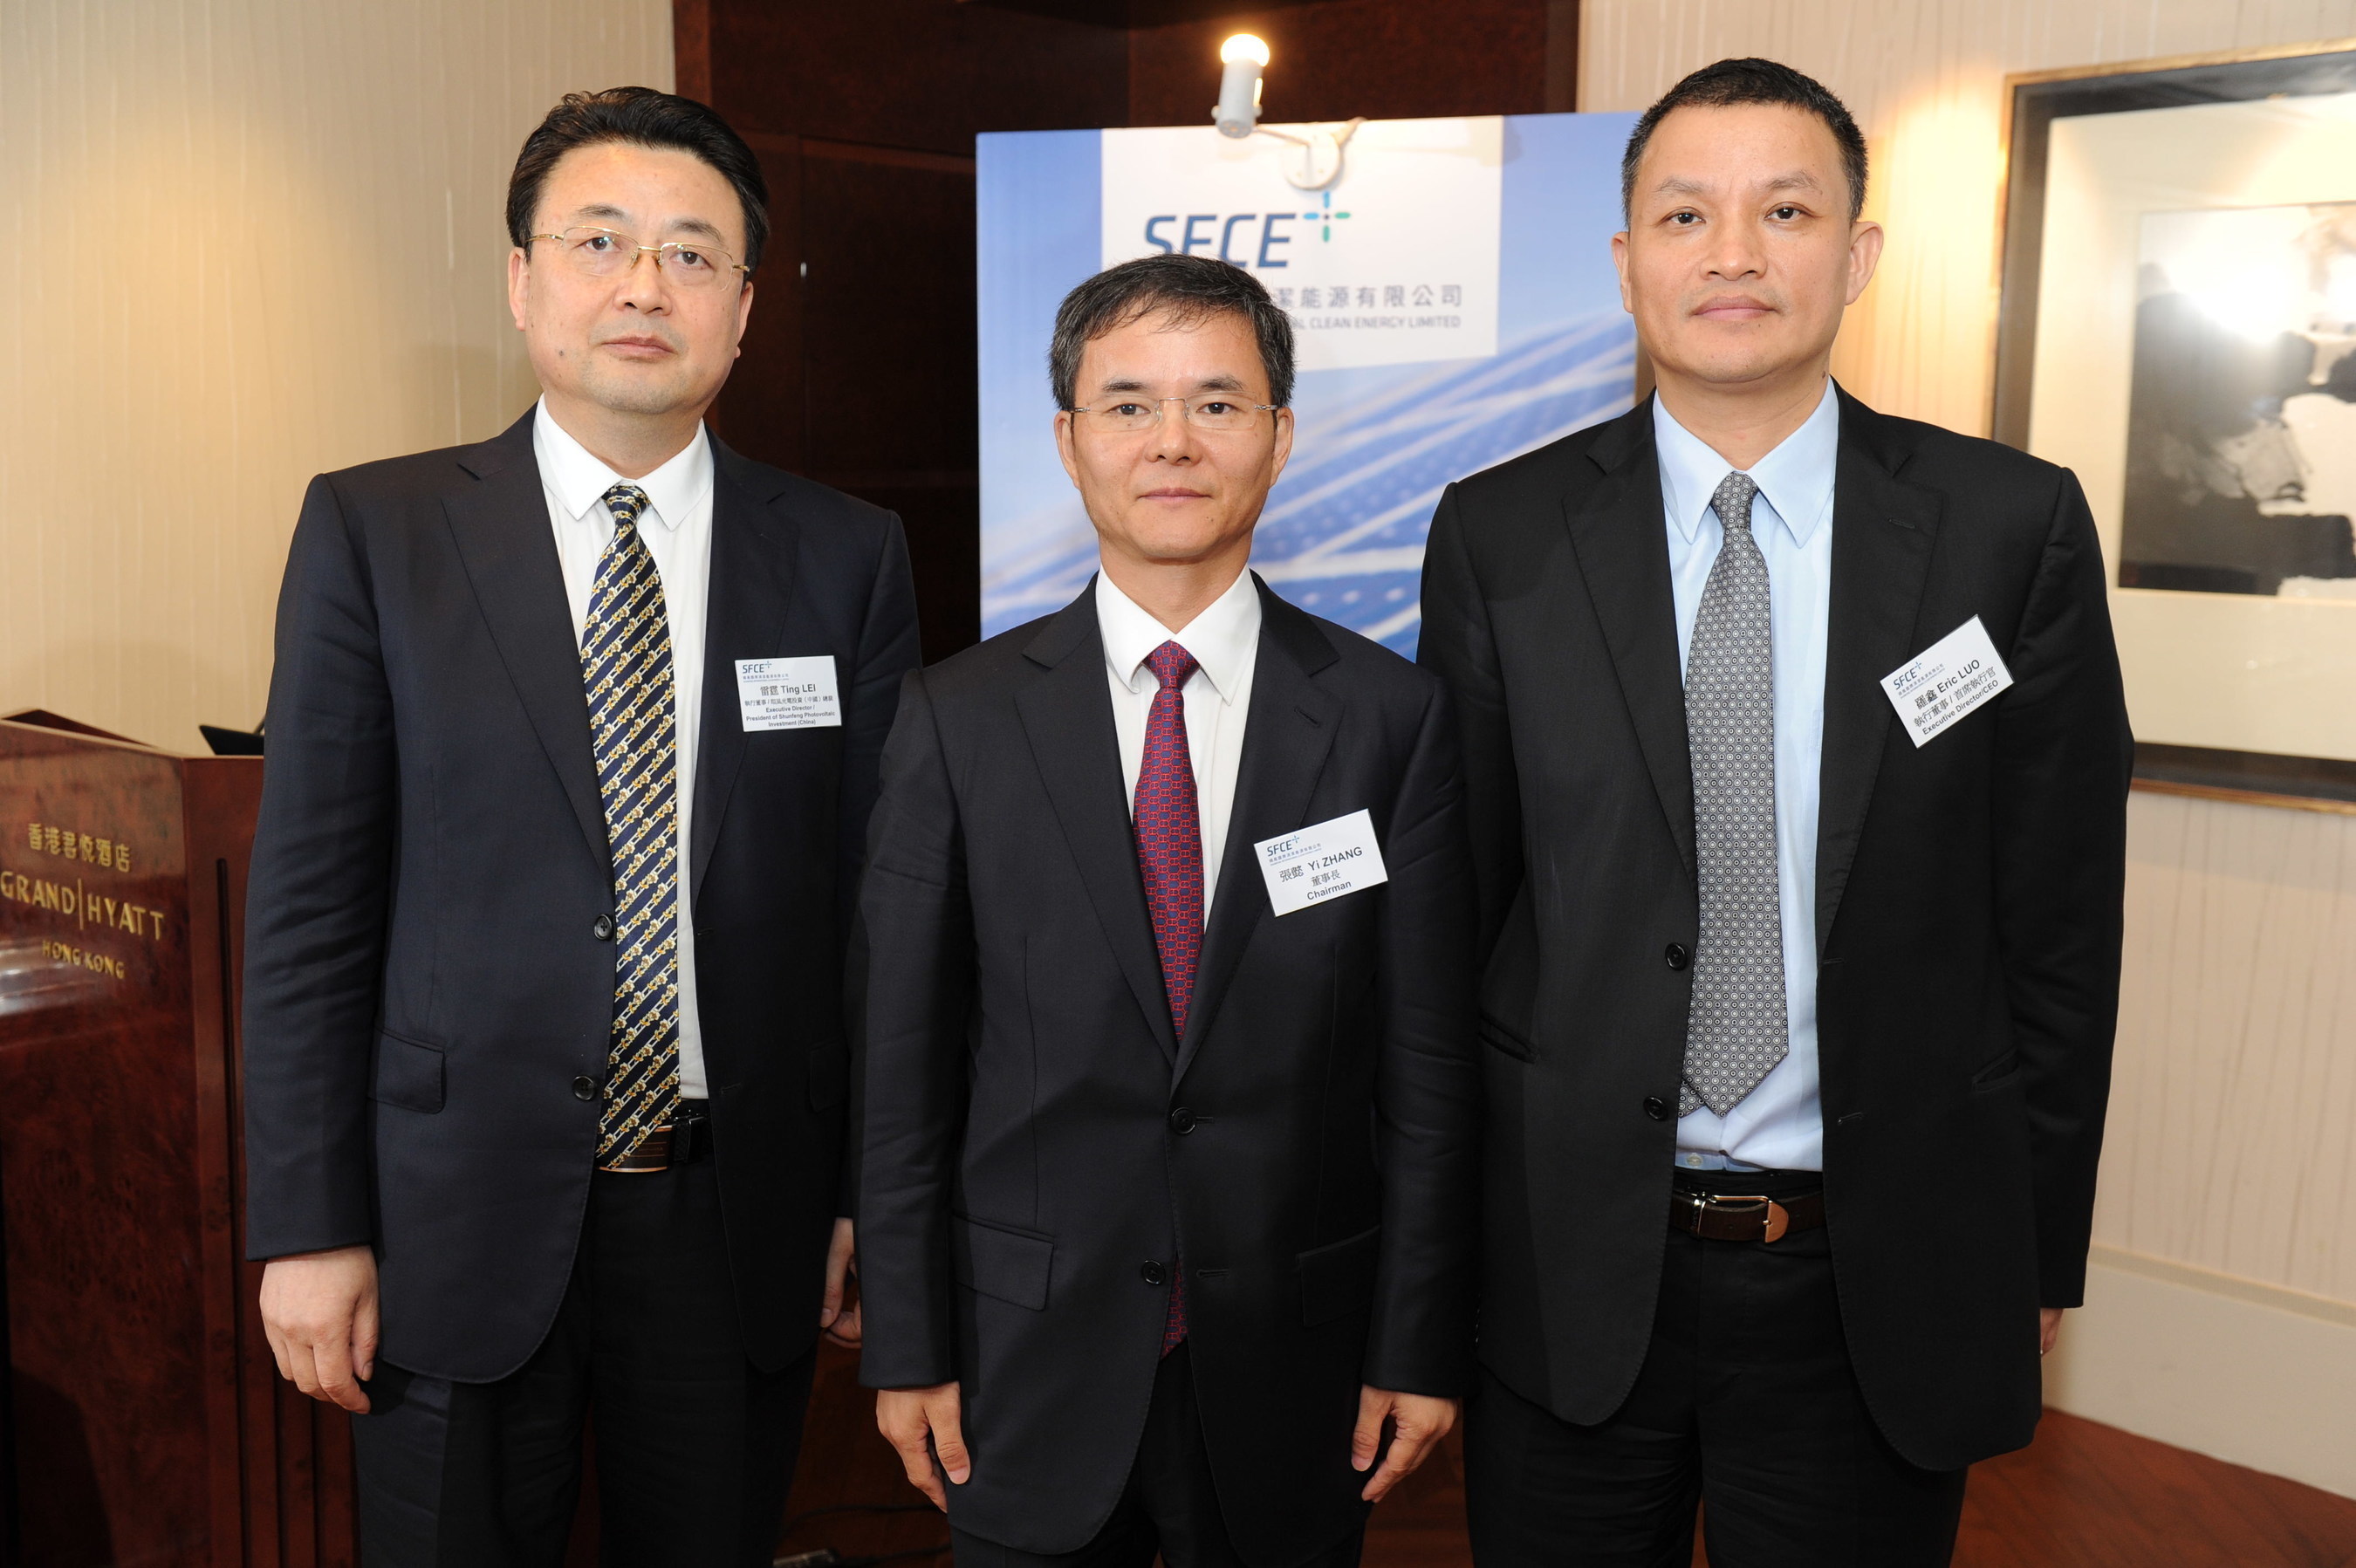 Shunfeng International Clean Energy Limited Media Briefing, from left to right: Ting Lei, SFCE Executive Director/President of Shunfeng Photovoltaic Investment (China), Yi Zhang, SFCE Chairman, Eric Luo, SFCE Executive Director/CEO